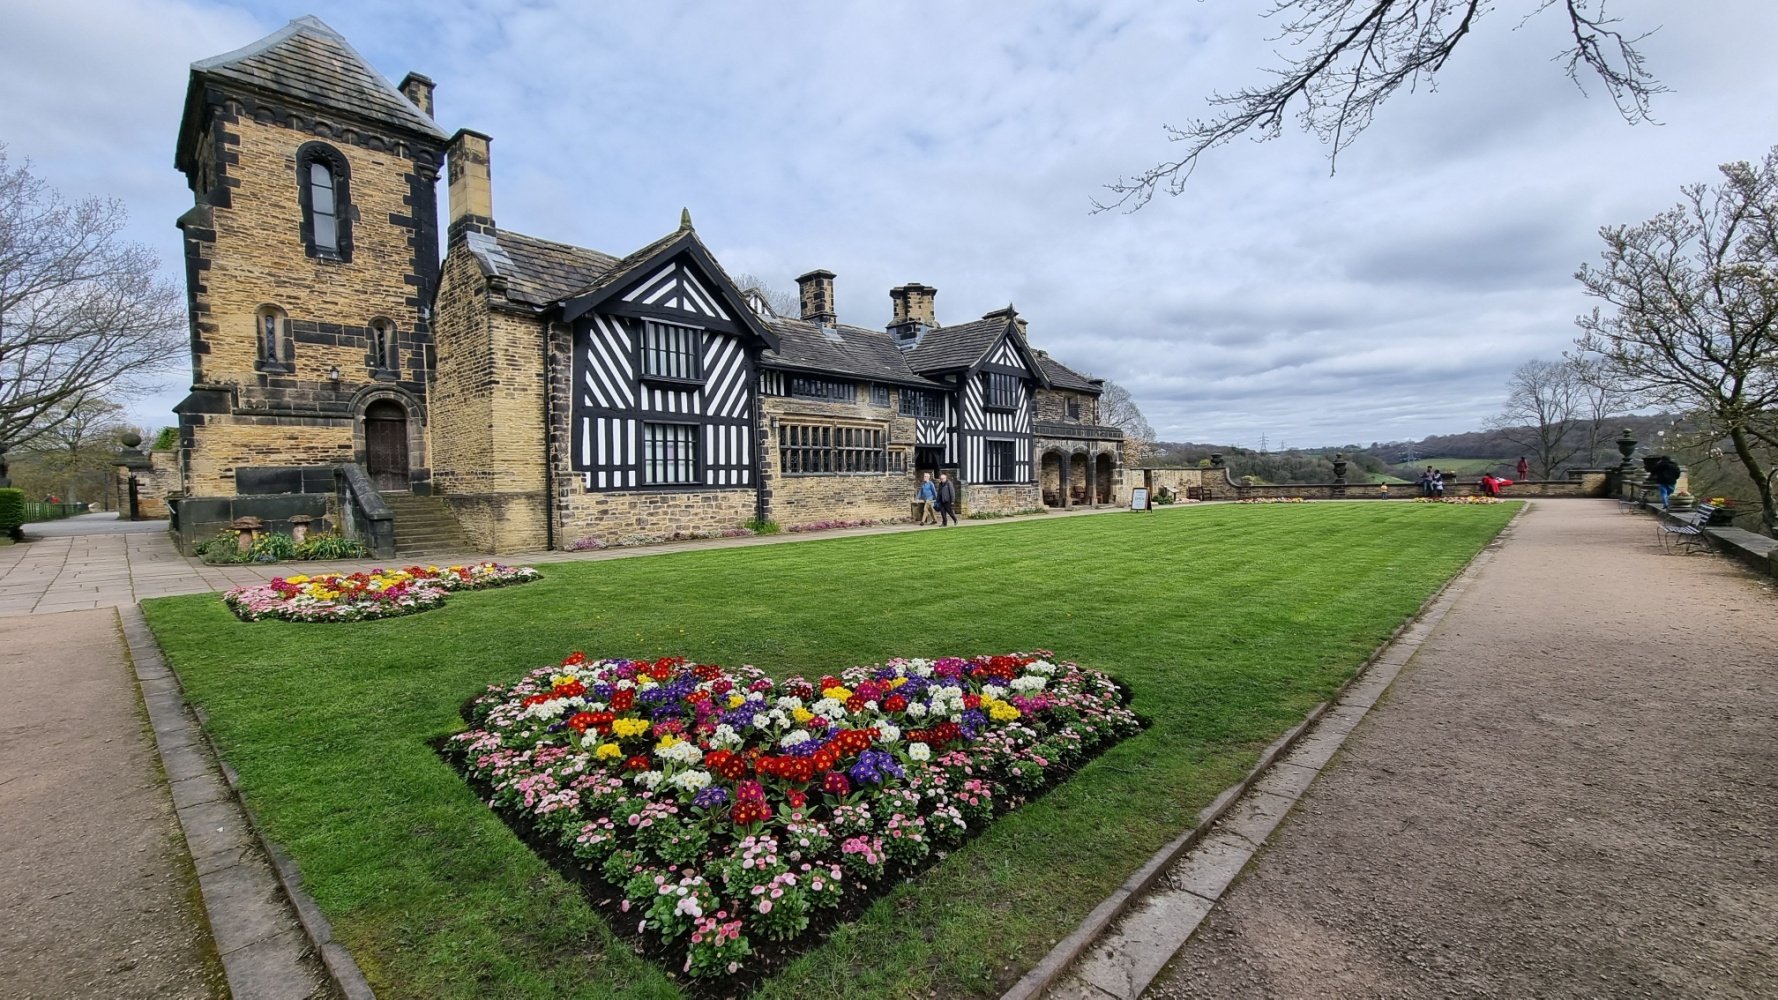 Image name shibden hall halifax west yorkshire the 22 image from the post A look at the history of Shibden Hall, with Dr Emma Wells in Yorkshire.com.